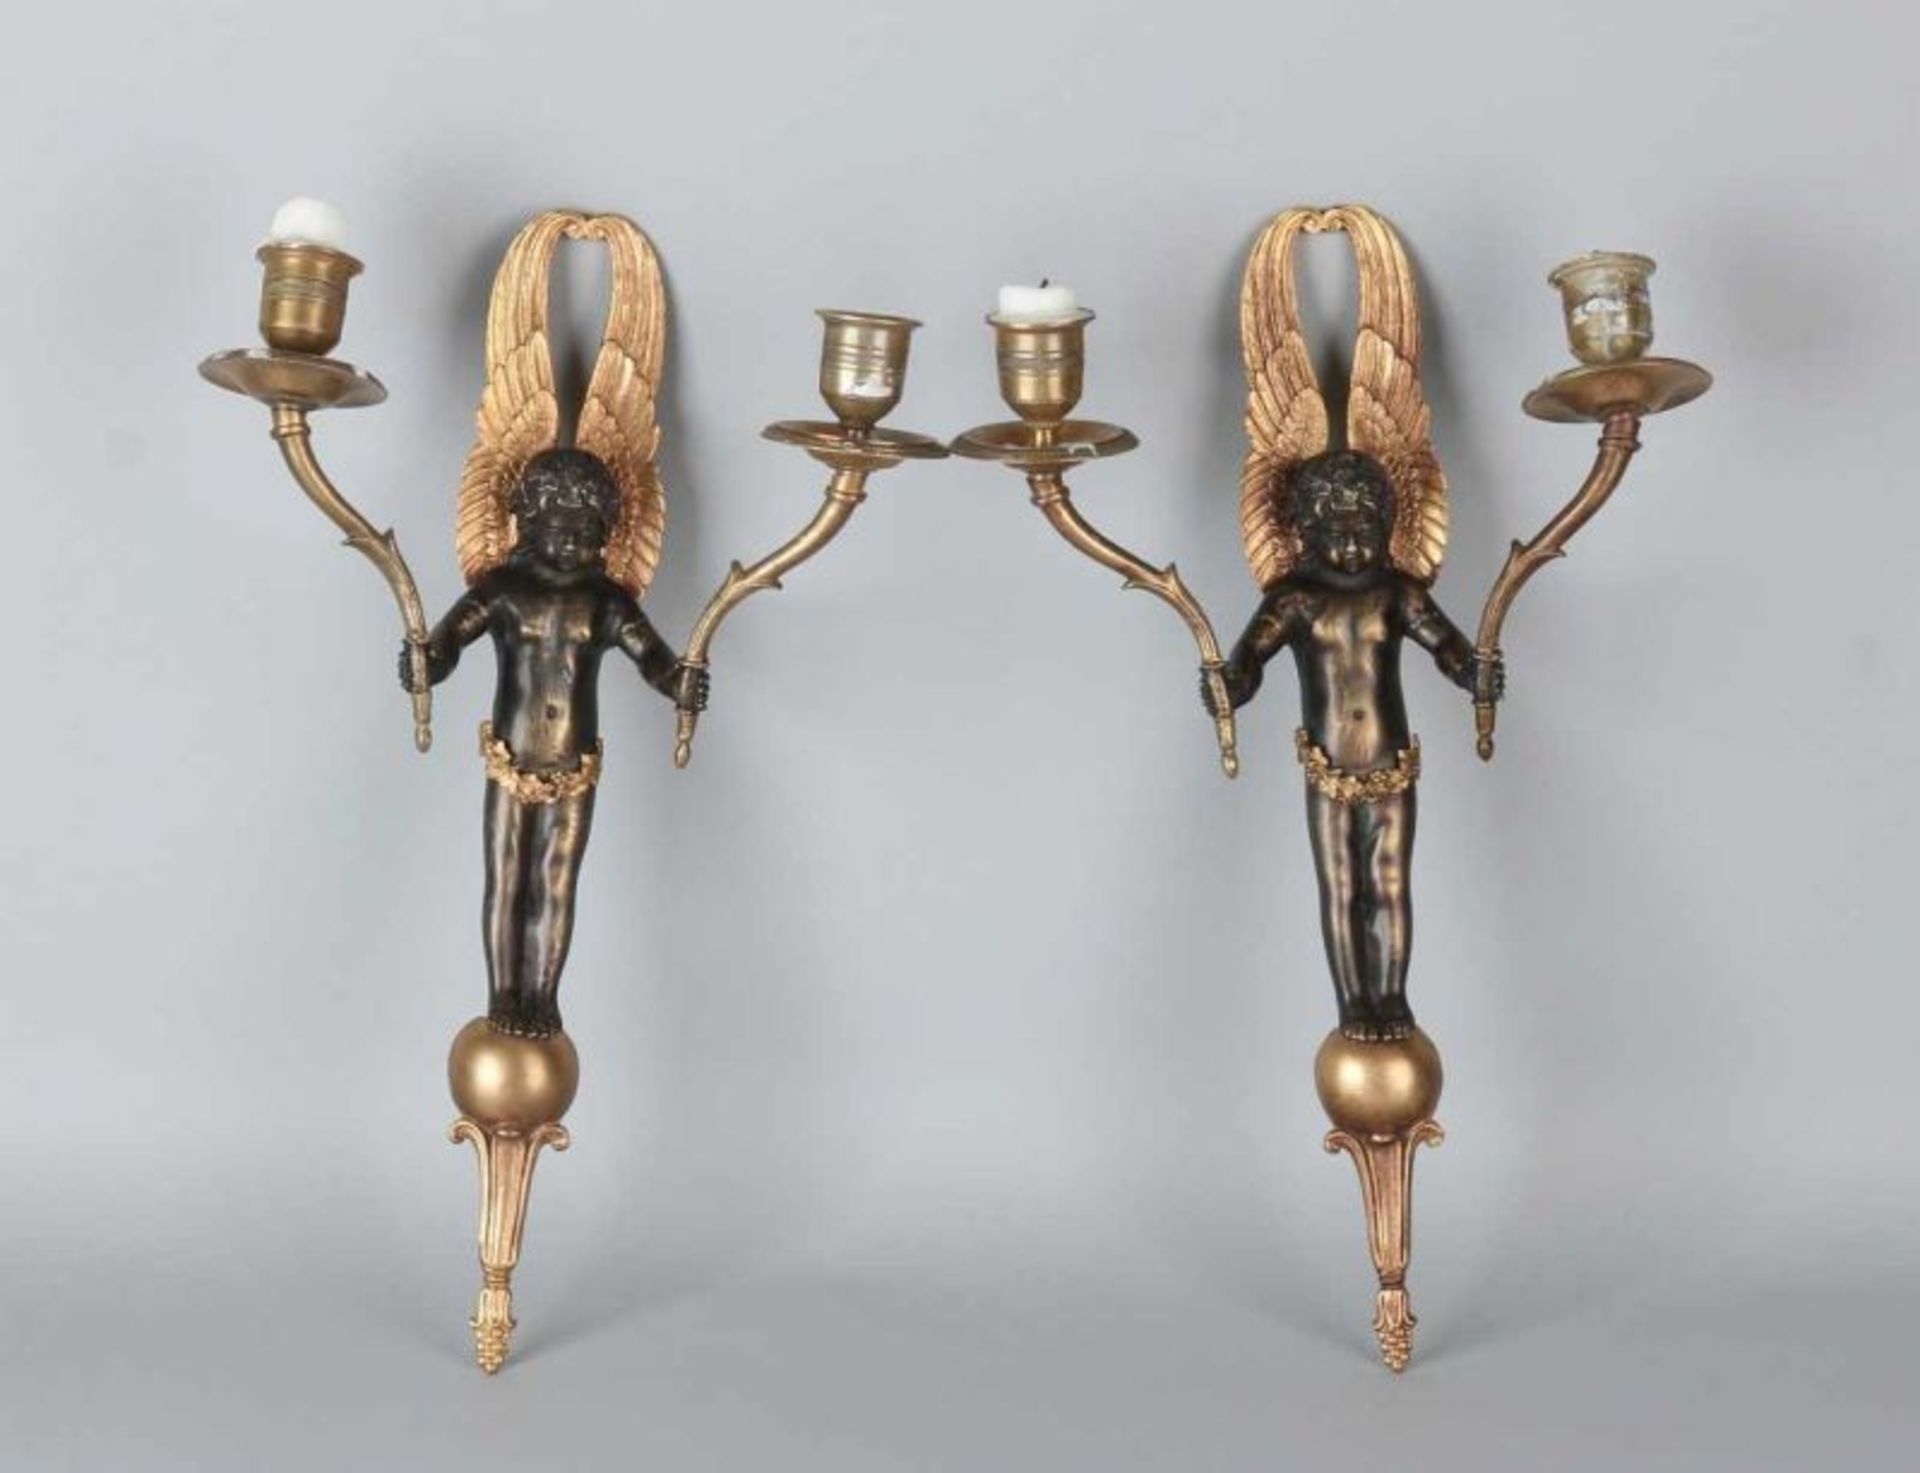 Two 19th-century bronze Empire-style wall candle holders, partly in a bun. Dimensions: 36 cm. In